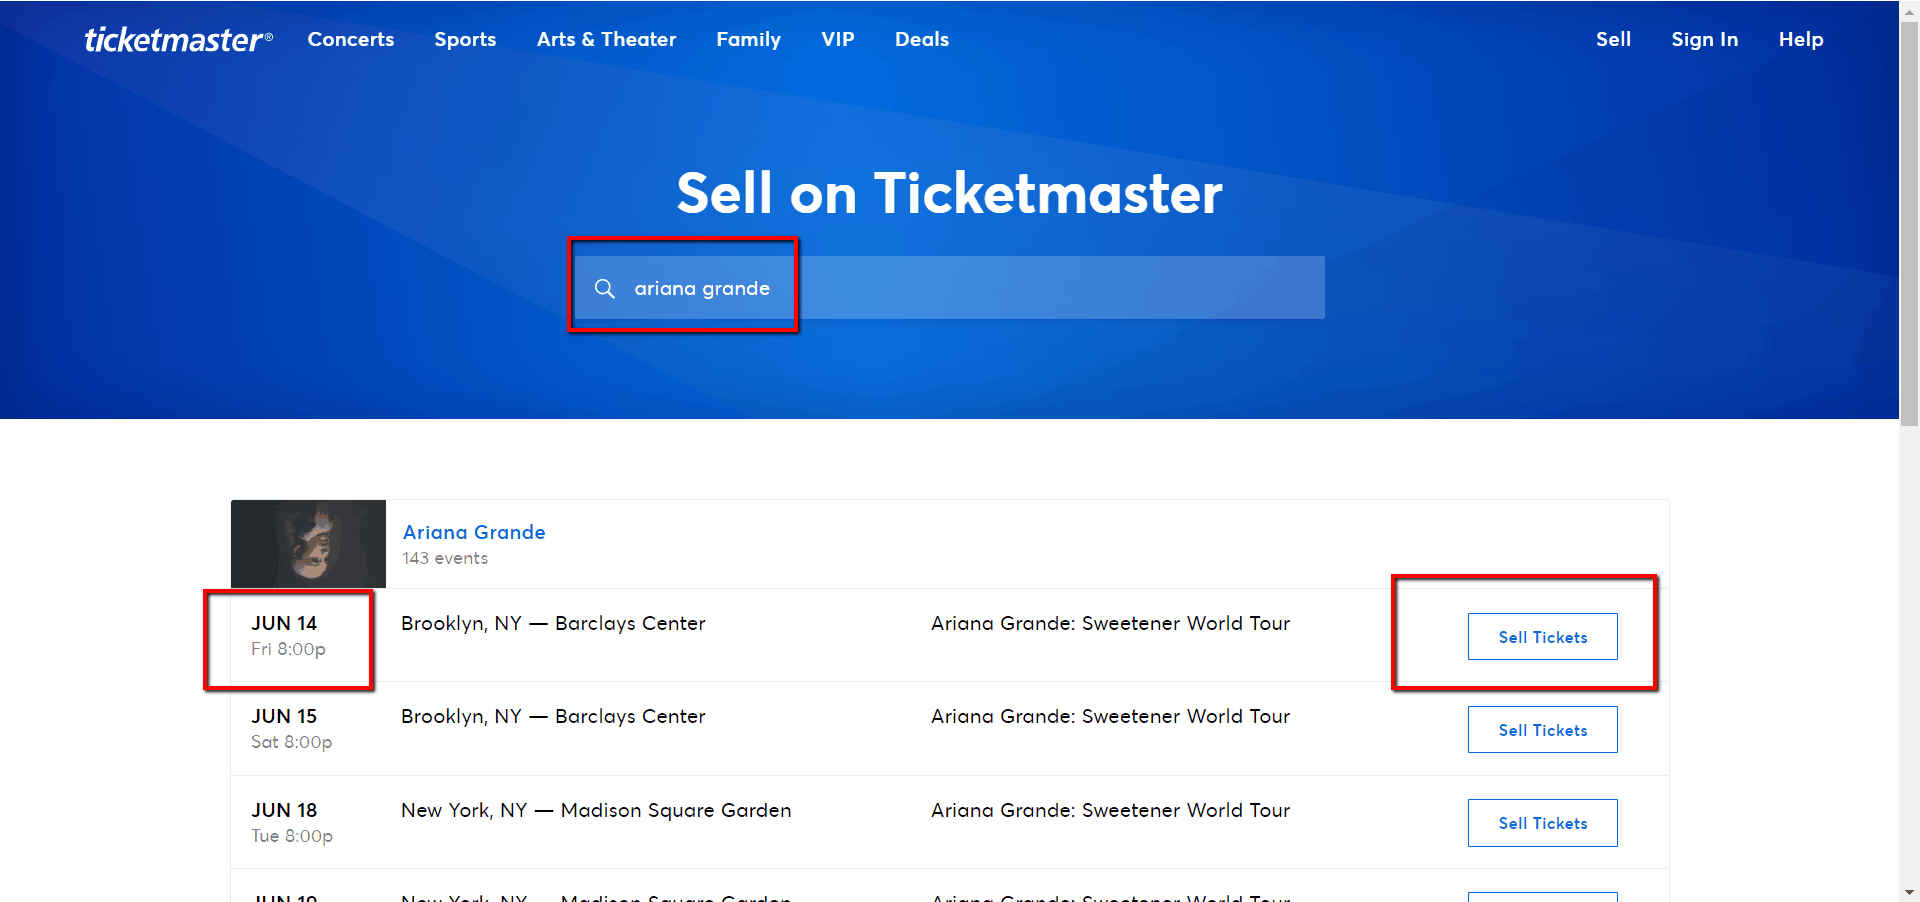 How to resell concert tickets on Ticketmaster